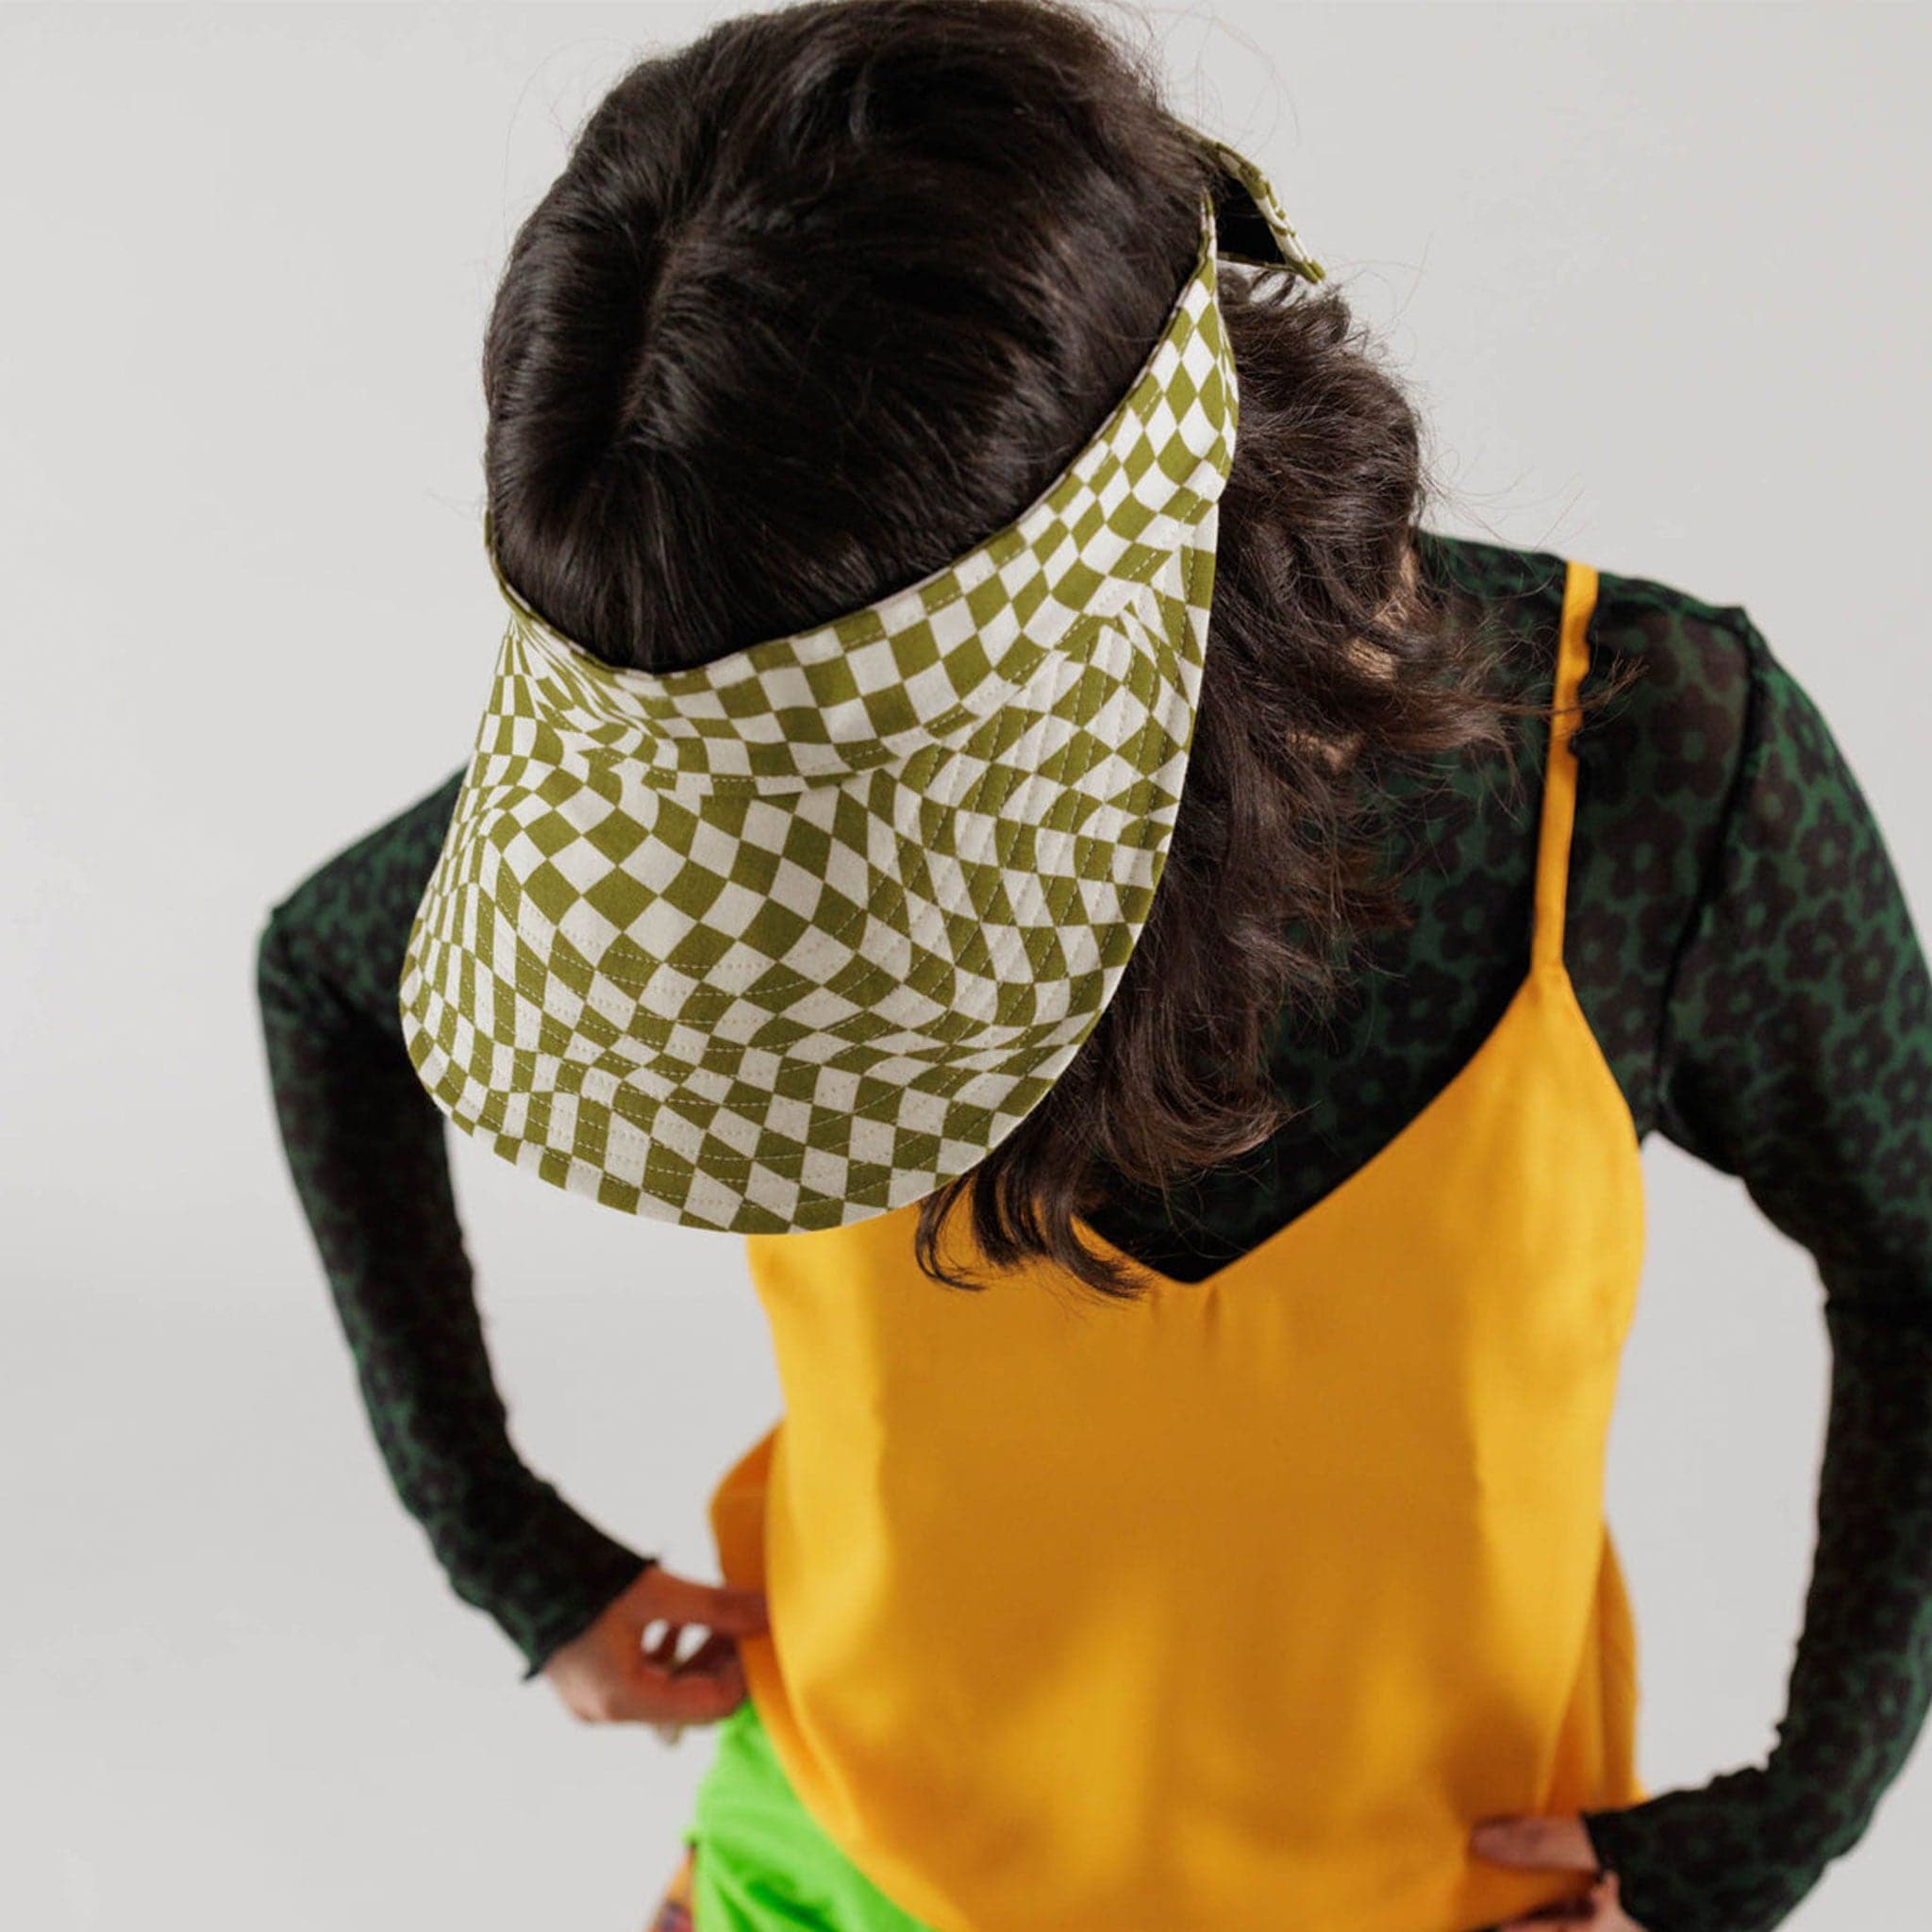 The green and white wavy checkered visor is shown here on a model.